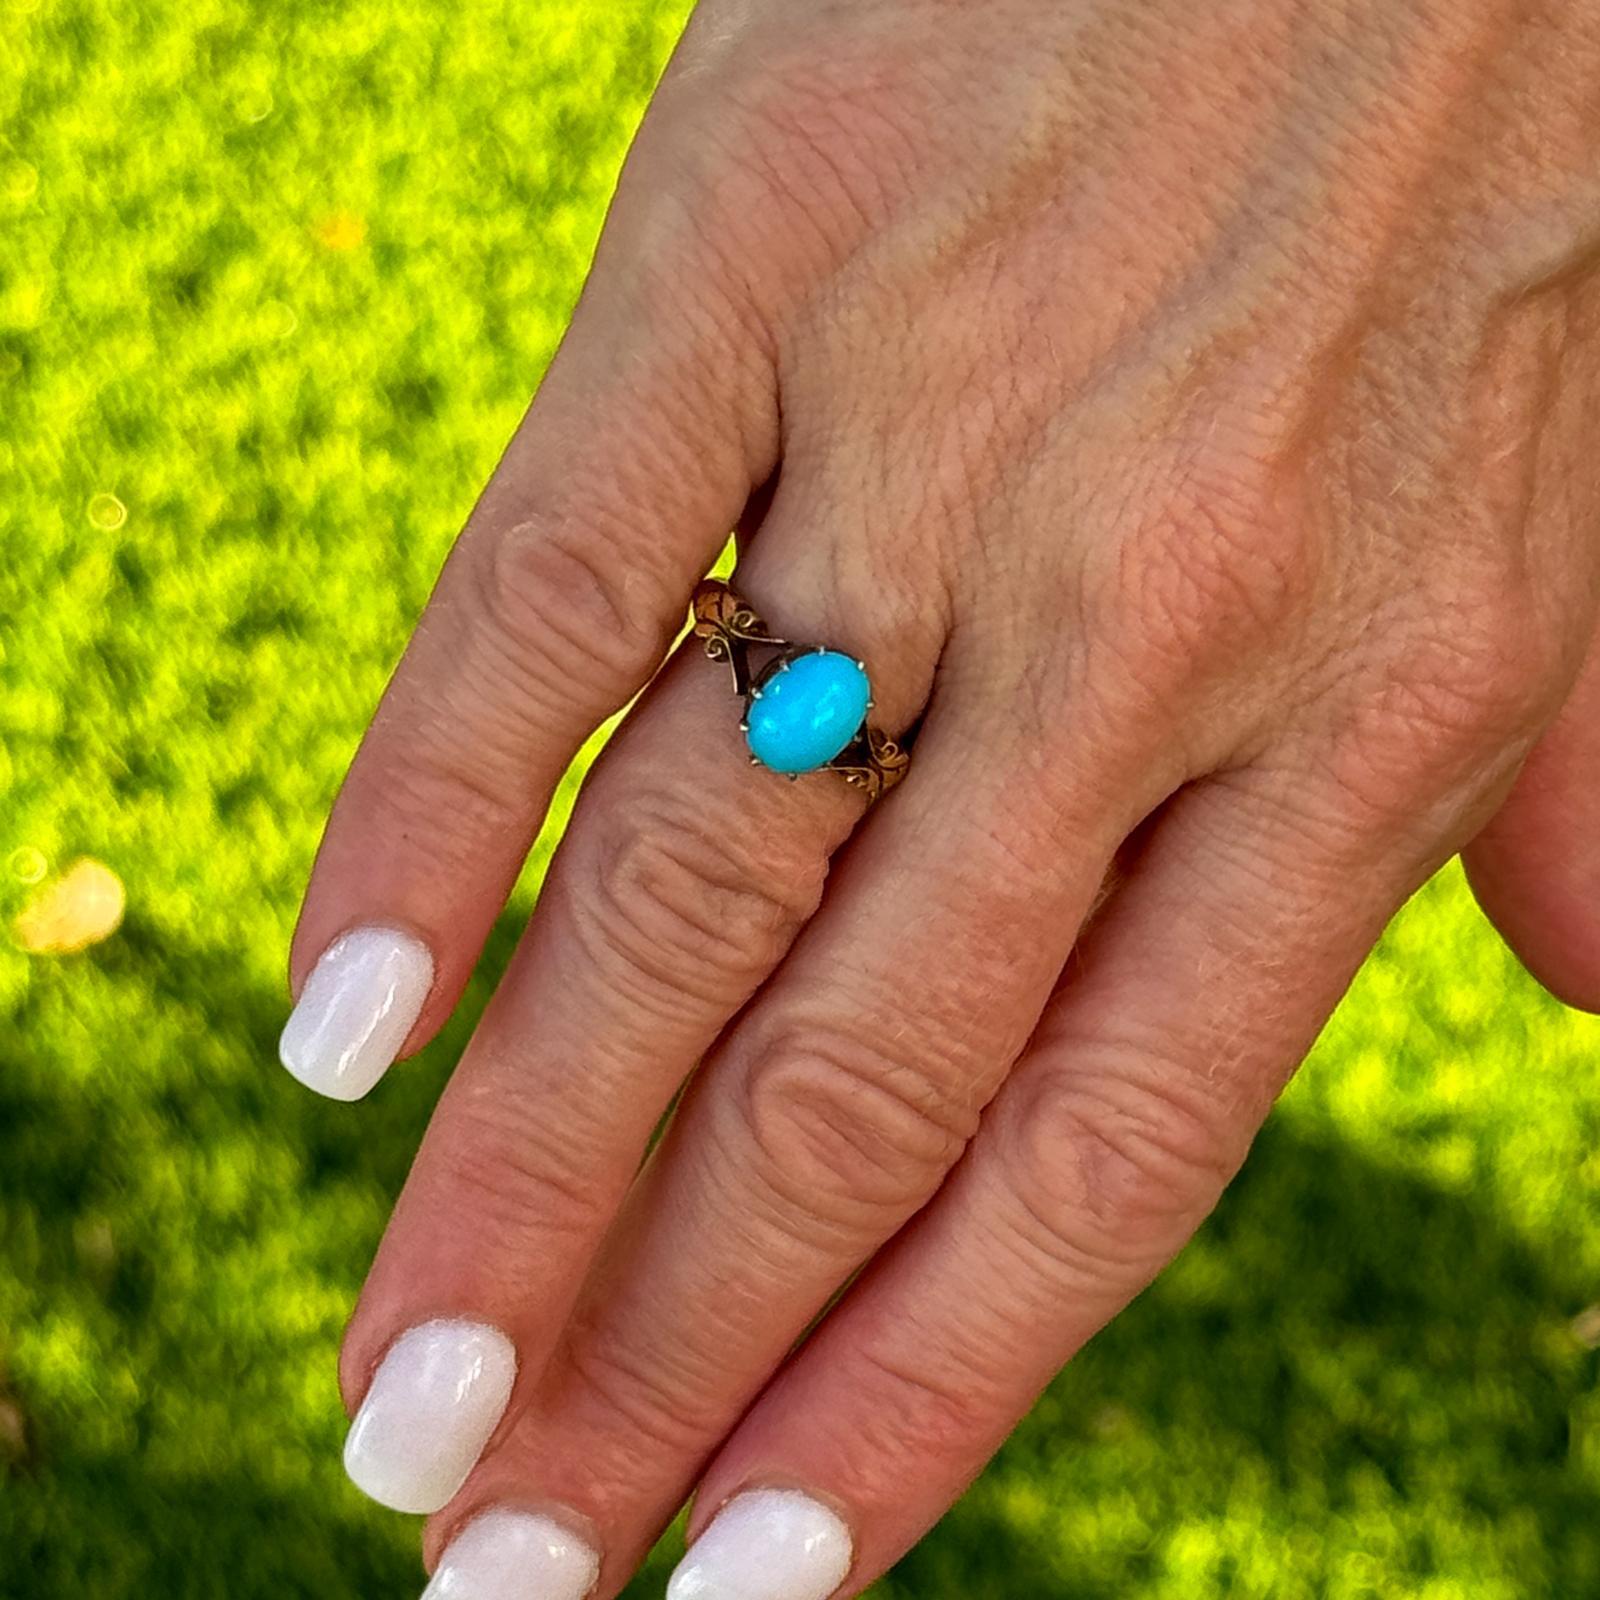 Beautiful vintage turquoise ring fashioned in 18 karat yellow gold. The ring features a cabochon natural turquoise gemstone set in a handcrafted vintage mounting. The ring is currently size 5.5 (can be sized), and measures 6 x 10mm. Weight: 3.7